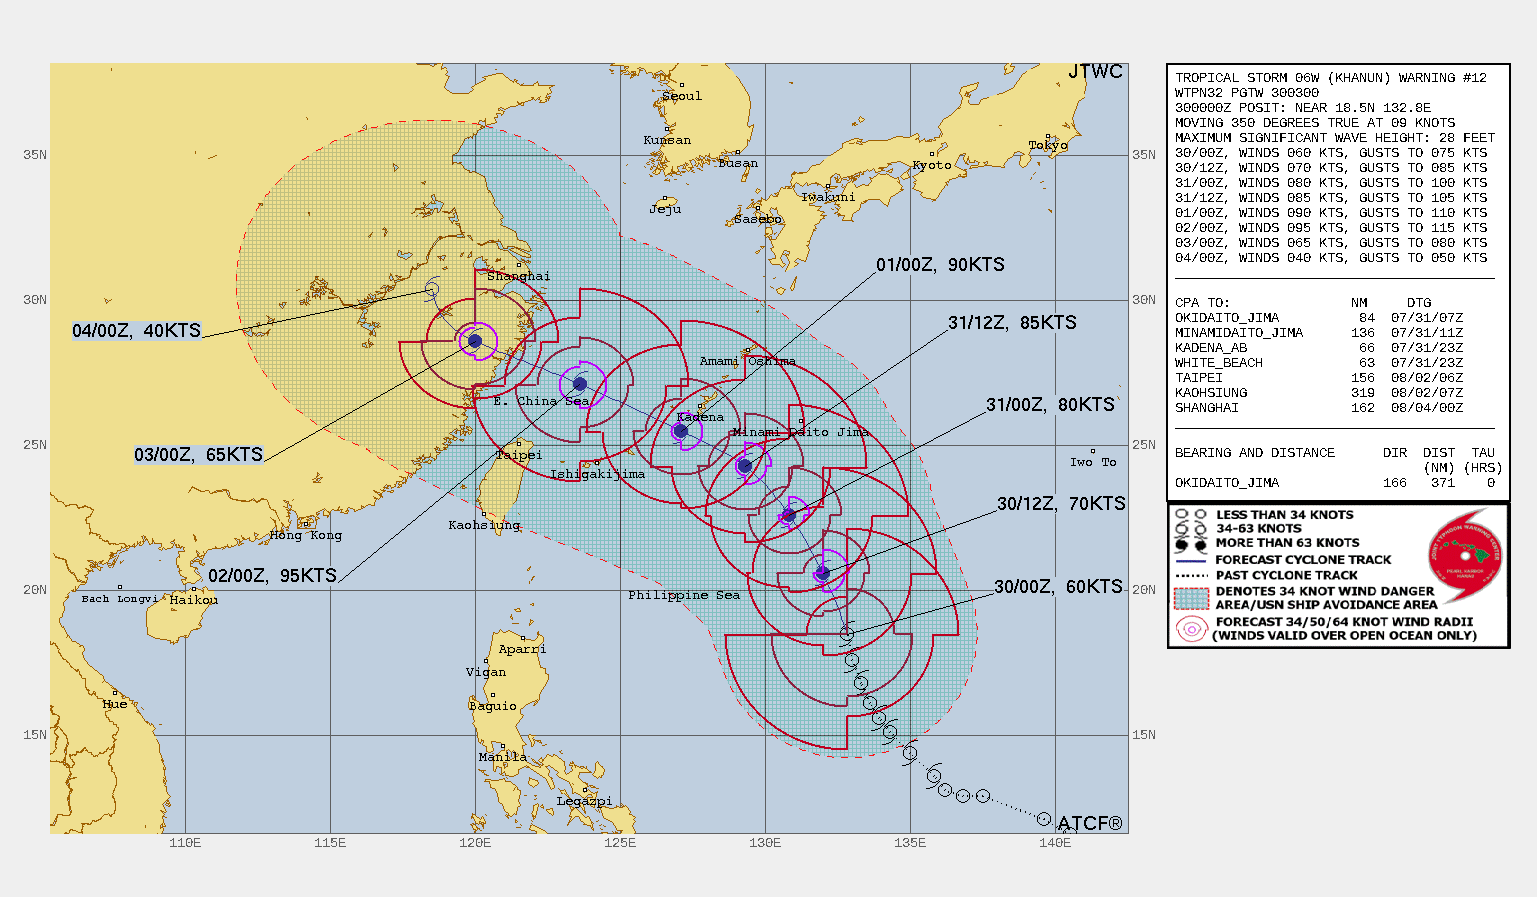 FORECAST REASONING.  SIGNIFICANT FORECAST CHANGES: THERE ARE NO SIGNIFICANT CHANGES TO THE FORECAST FROM THE PREVIOUS WARNING.  FORECAST DISCUSSION: TS KHANUN WILL CONTINUE ON A MORE NORTH-NORTHWESTWARD TRACK UNDER THE STEERING INFLUENCE OF THE NER. AFTER TAU 36, A SUBTROPICAL RIDGE (STR) TO THE NORTH WILL ASSUME STEERING AND DRIVE THE SYSTEM ON A NORTHWESTWARD TRAJECTORY TOWARD OKINAWA, PASSING APPROXIMATELY 66 NM SOUTHWEST OF THE KADENA AB AROUND TAU 48 PRIOR TO DRIFTING INTO THE EAST CHINA SEA AND MAKING LANDFALL SOUTH OF SHANGHAI AROUND TAU 90. THE FAVORABLE ENVIRONMENT WILL FUEL A GRADUAL INTENSIFICATION AIDED BY INCREASING POLEWARD  OUTFLOW AS THE STEERING MECHANISM SWITCHES TO THE STR TO A PEAK OF  95KTS BY TAU 72. AFTER TAU 72, SUBSIDENCE CAUSED BY A PASSING MID- LATITUDE TROUGH TO THE NORTH WILL WEAKEN 06W TO 65 KTS AT TAU 96.  AFTER LANDFALL, INTERACTION WITH THE RUGGED CHINESE INTERIOR WILL  MOSTLY BE RESPONSIBLE FOR THE RAPID EROSION, AND BY TAU 120, 06W  WILL BE REDUCED TO 40 KTS, POSSIBLY WEAKER, AS IT TRACKS FURTHER  INLAND.